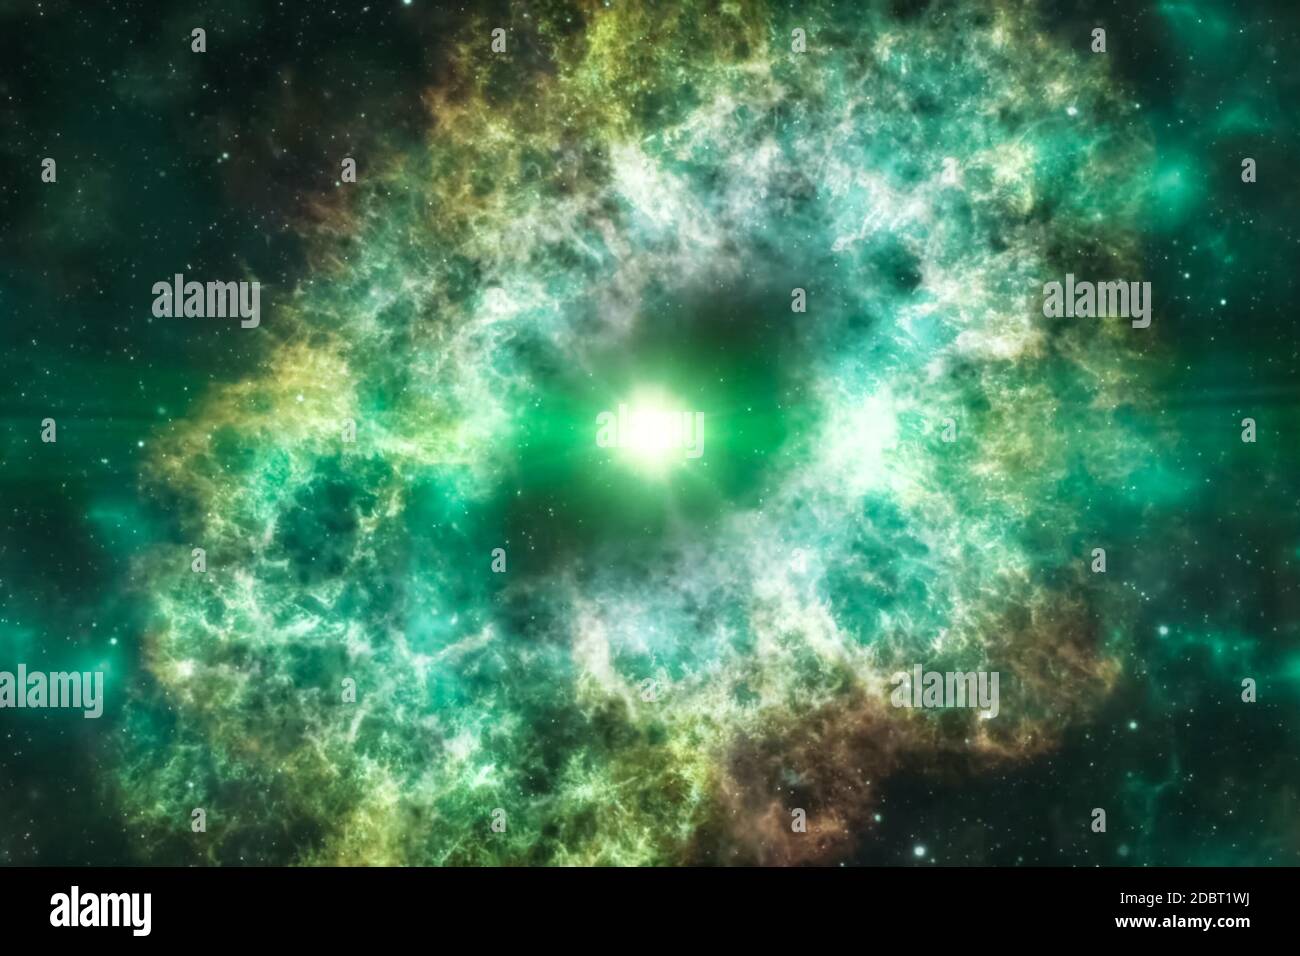 A supernova explosion in the universe among gas clouds. Stock Photo